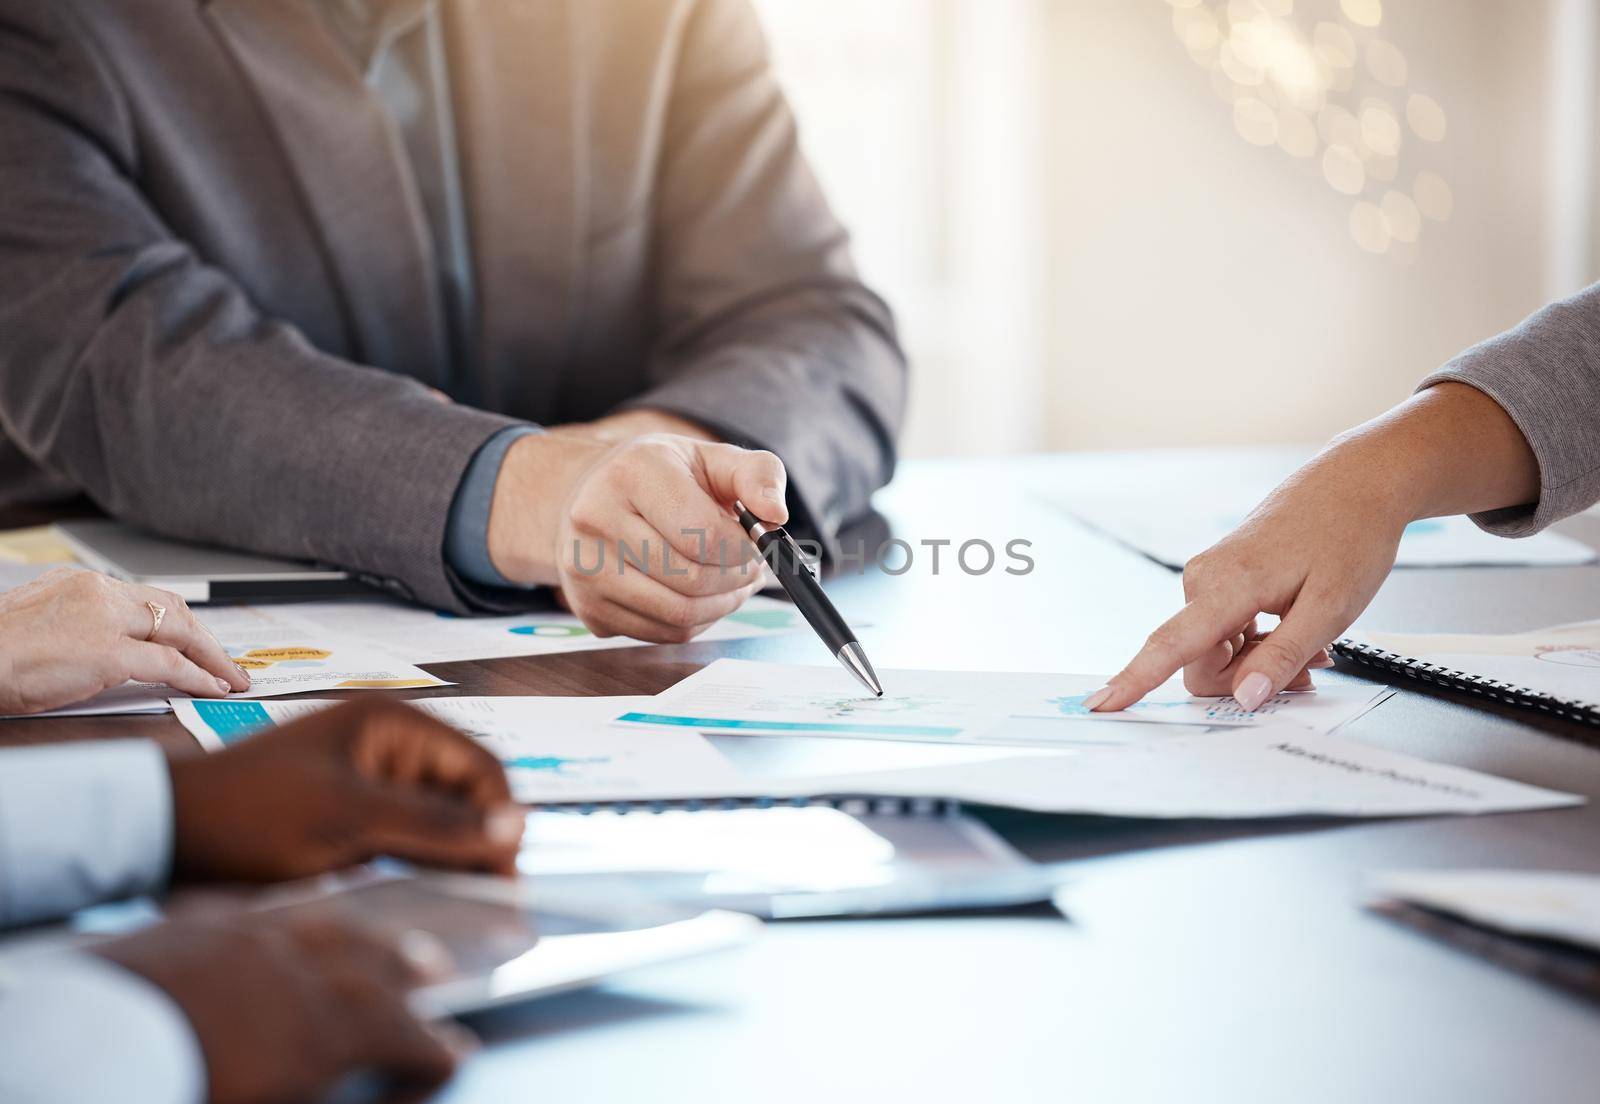 Corporate table, documents and hands in conversation on business analytics data report in office. Company workforce logistics, planning and strategy idea with professional communication